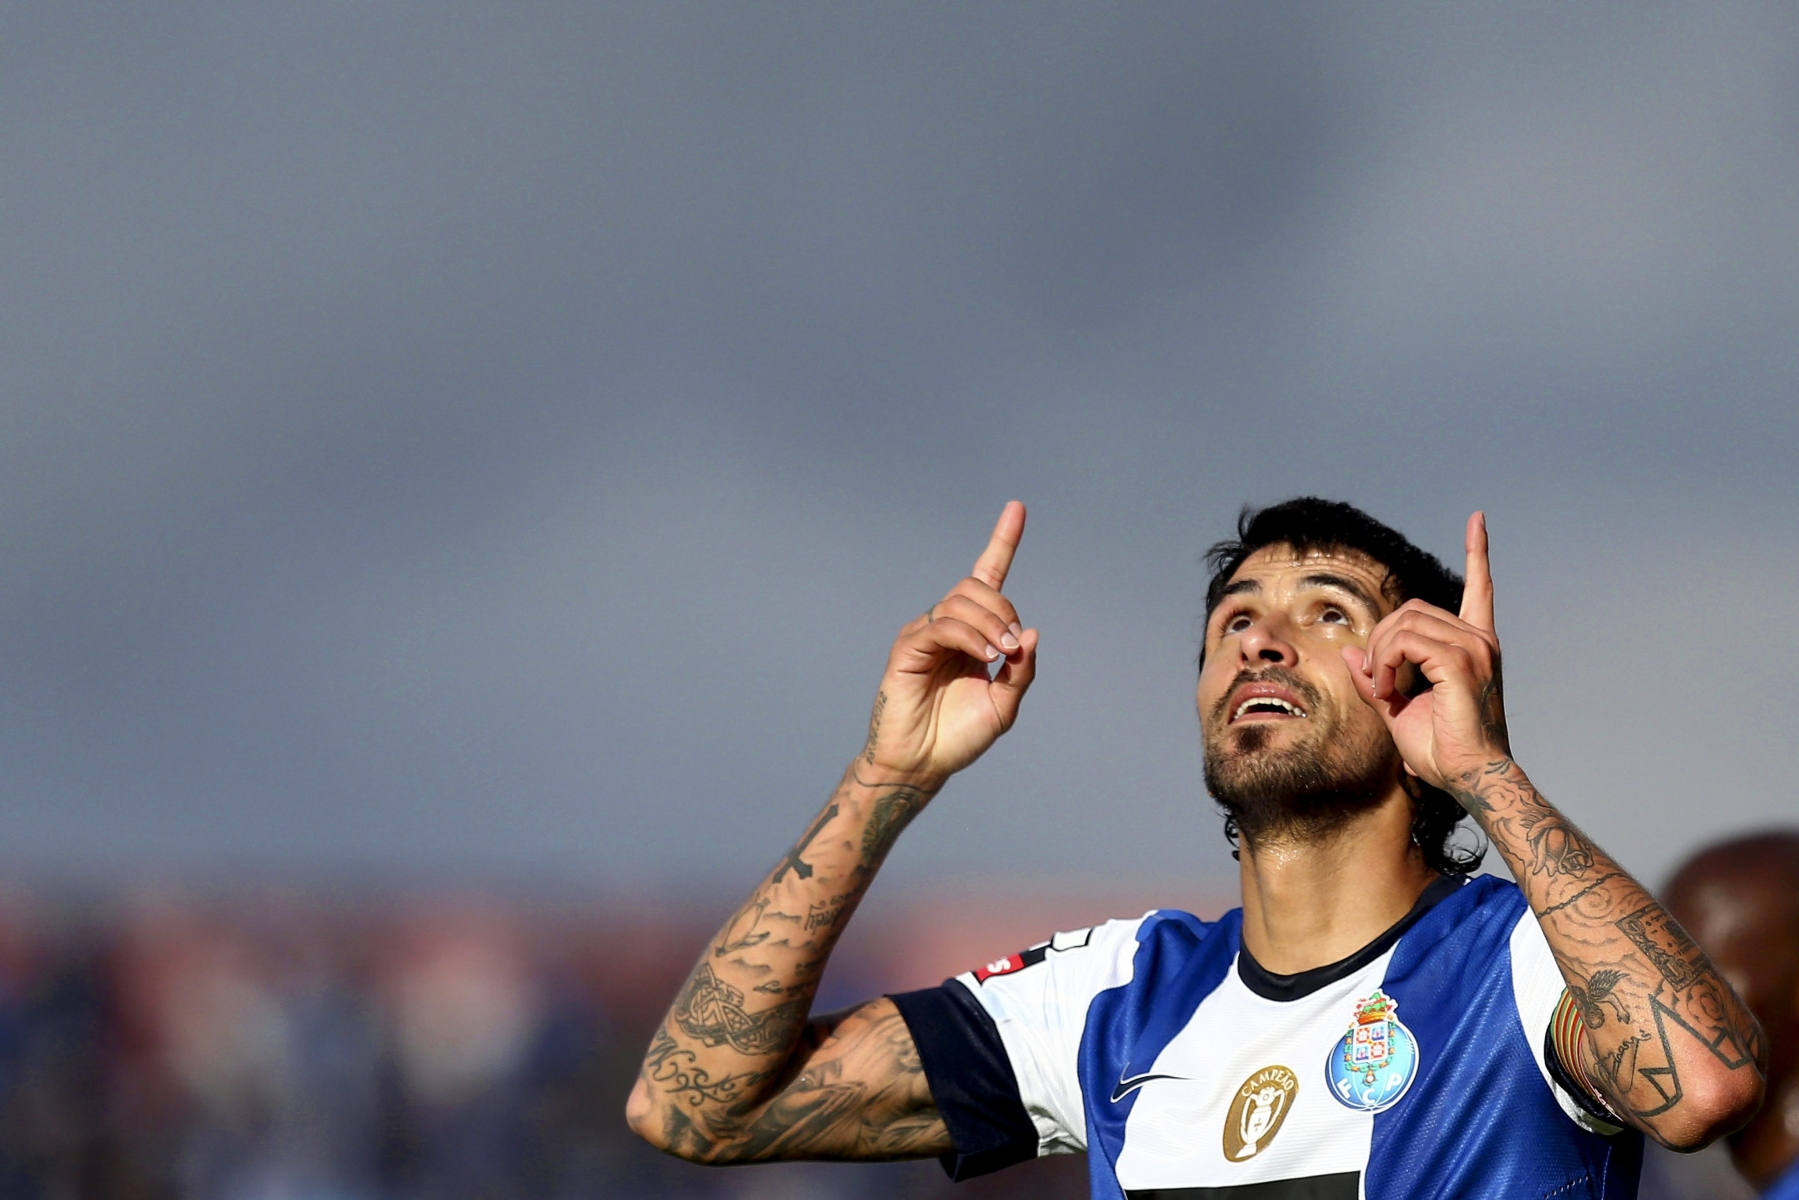 epa03707994 FC Porto's Lucho Gonzalez celebrates after scoring the 1-0 lead from the penalty spot against Pacos de Ferreira during the Portuguese First League soccer match at Mata Real stadium in Pacos de Ferreira, Portugal, 19 May 2013.  EPA/ESTELA SILVA